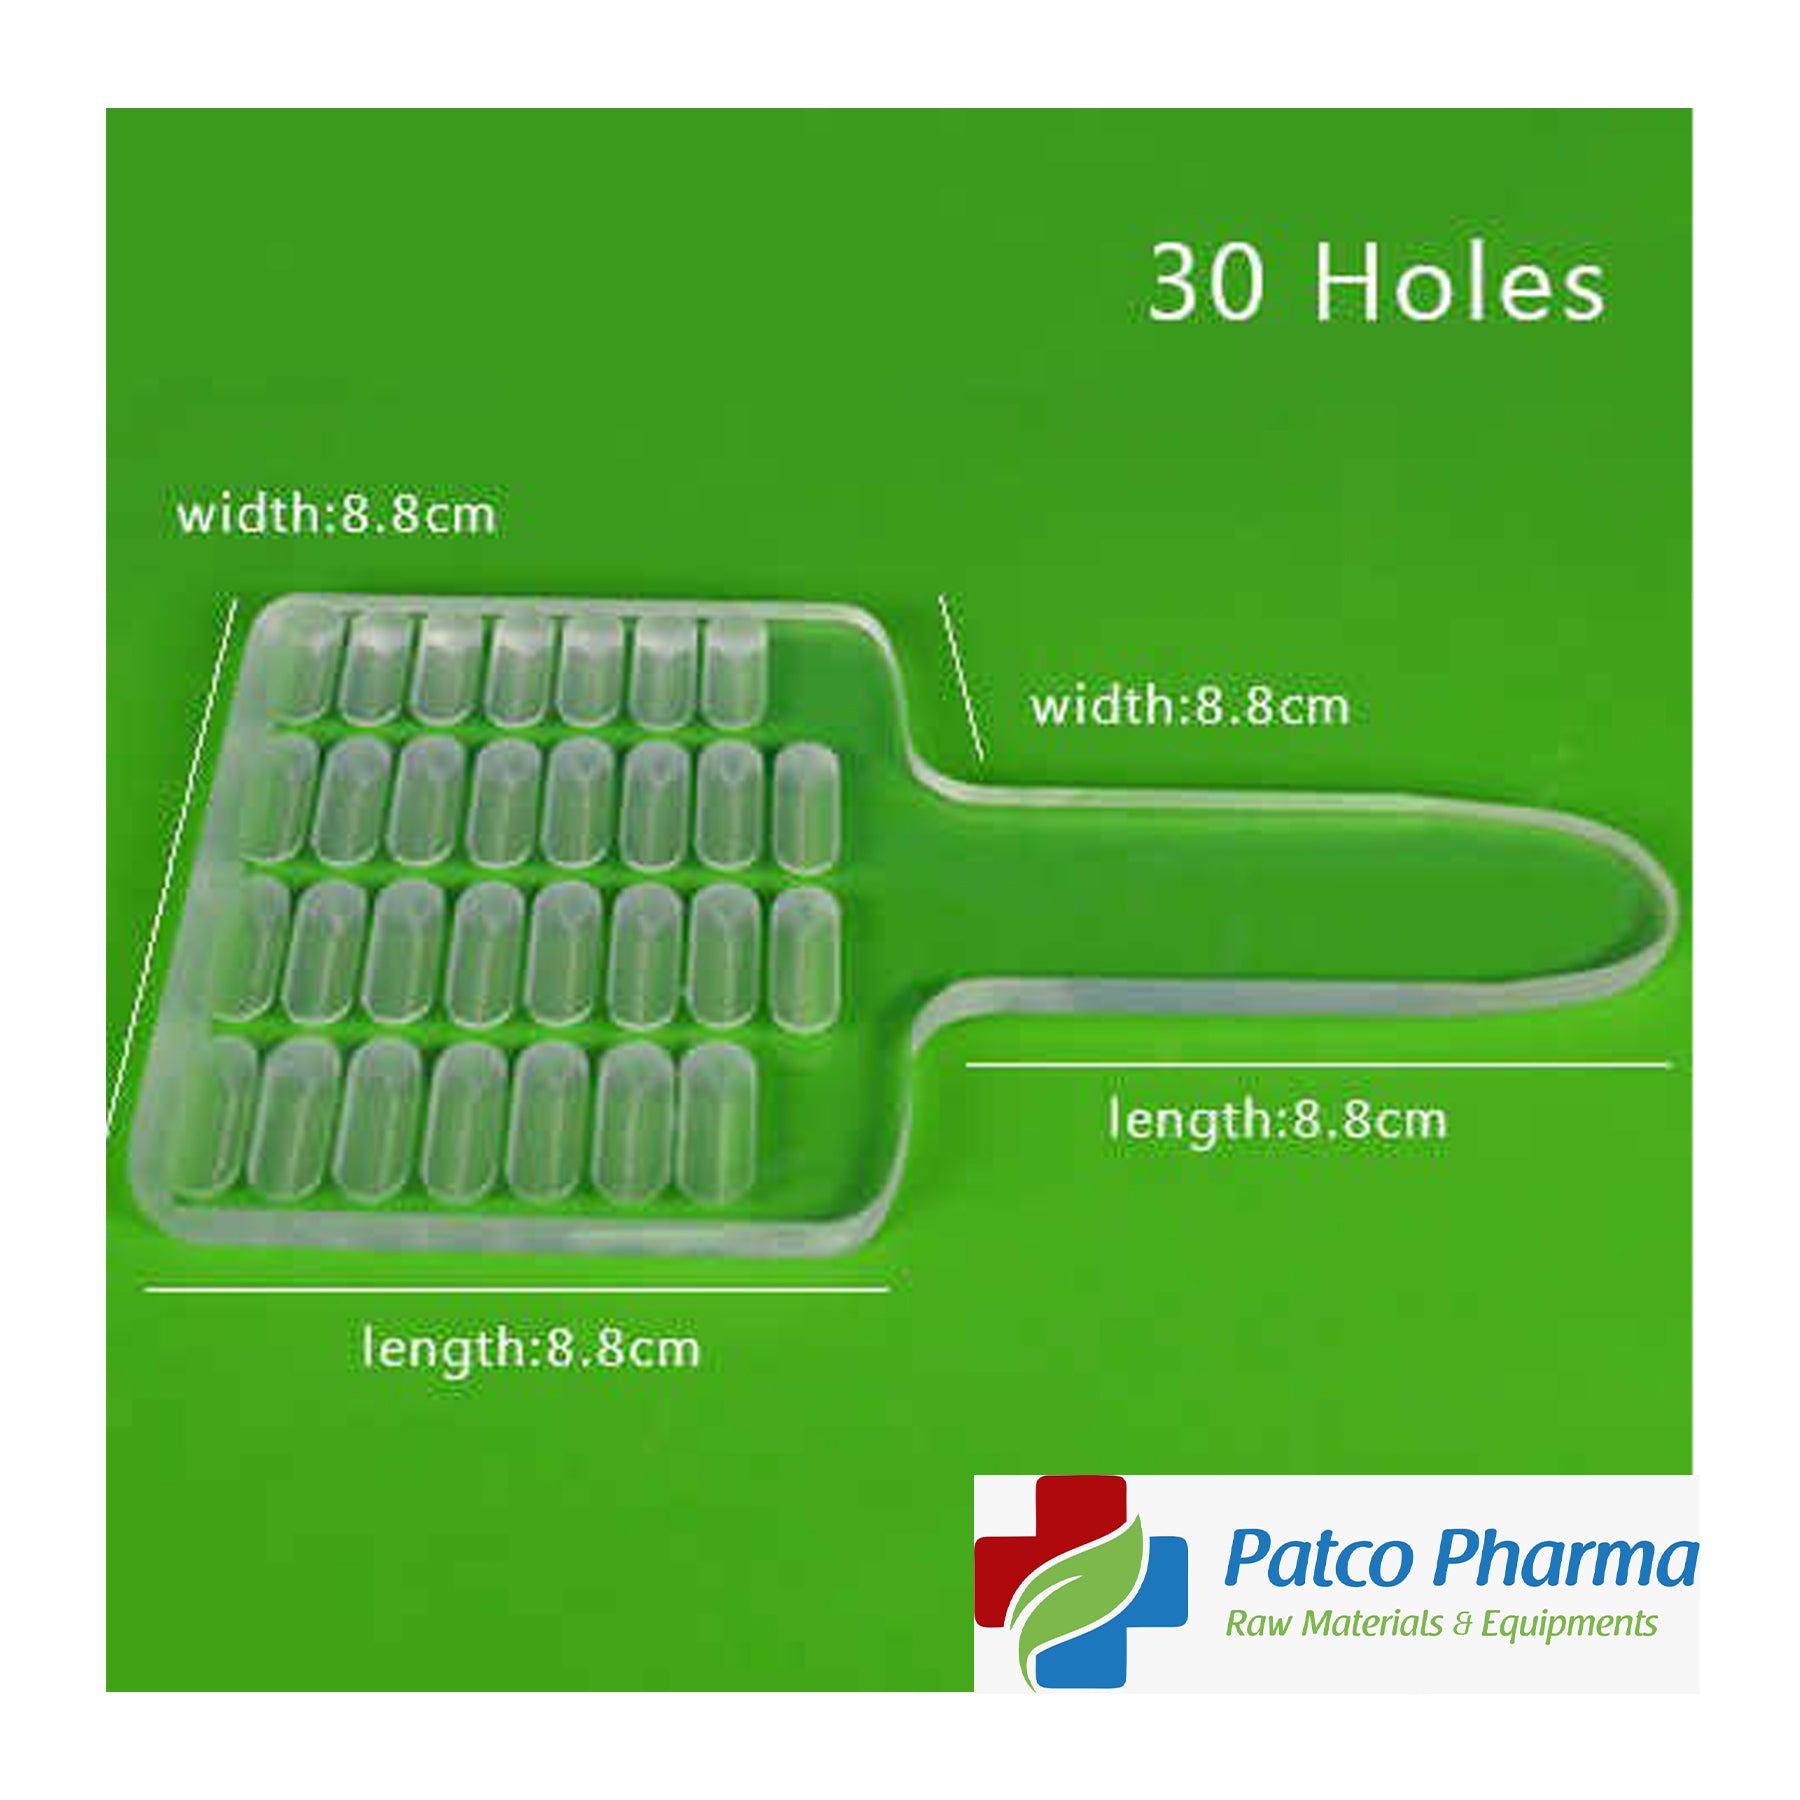 Manual Capsule Counter Count Board/Tray For Size 0 (30 Holes Capsule Counter) Patco Pharma